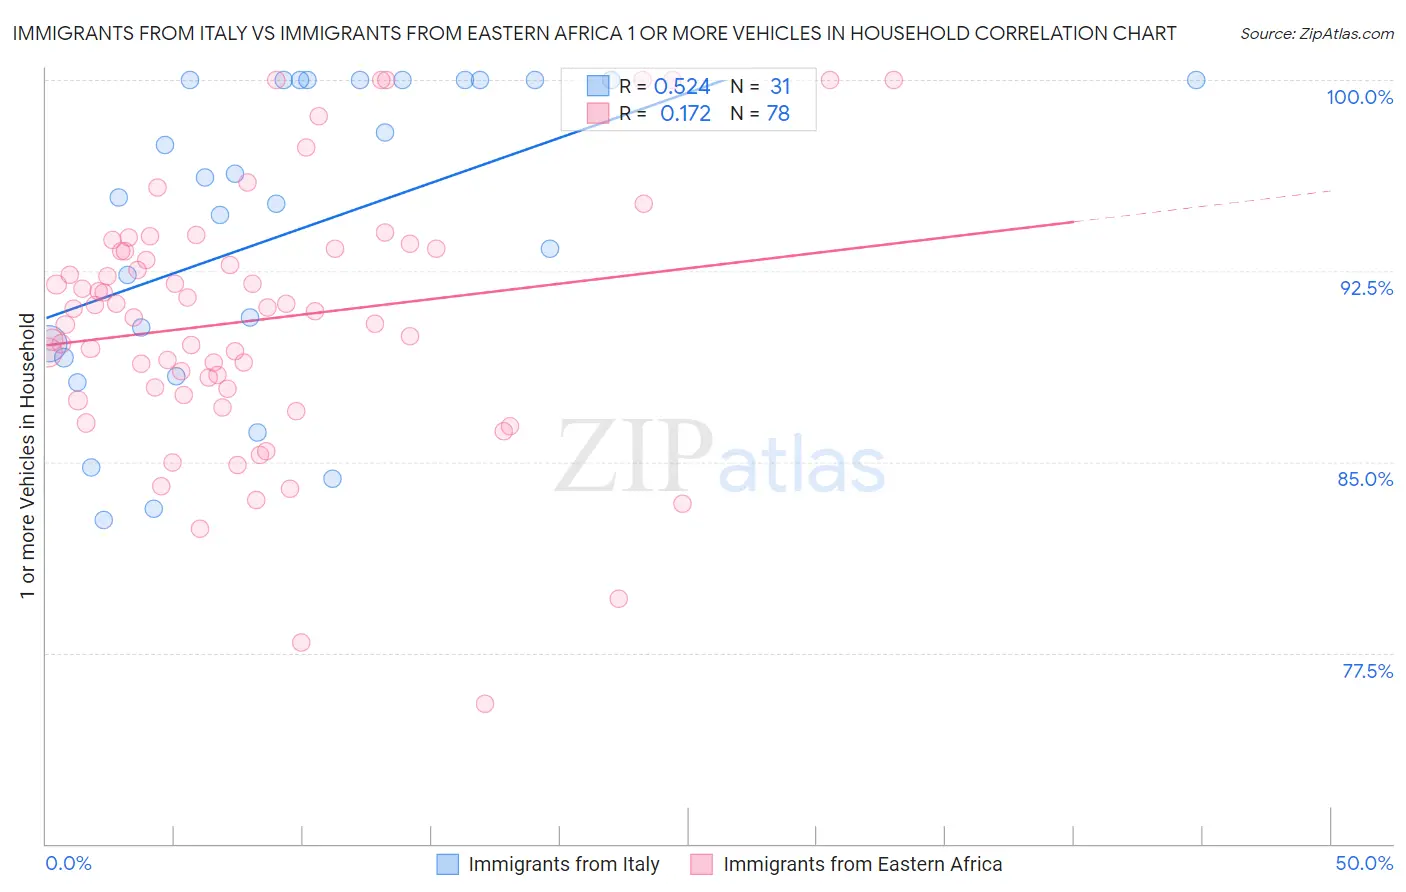 Immigrants from Italy vs Immigrants from Eastern Africa 1 or more Vehicles in Household